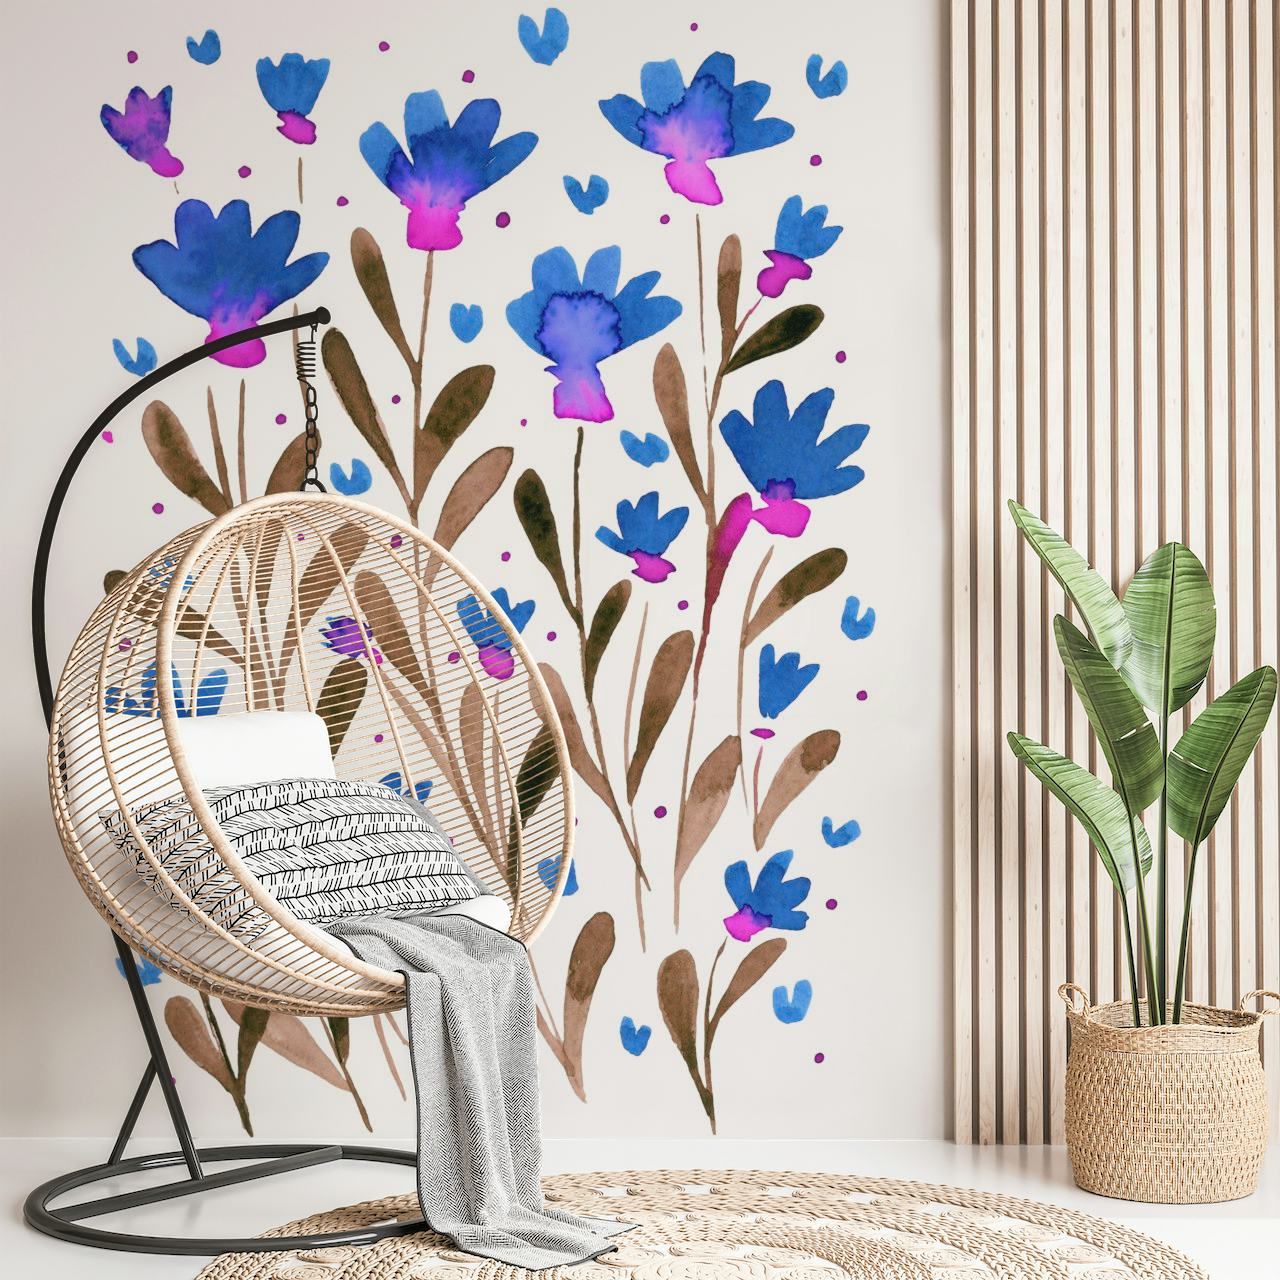 Forget me not flowers - blue and pink behang